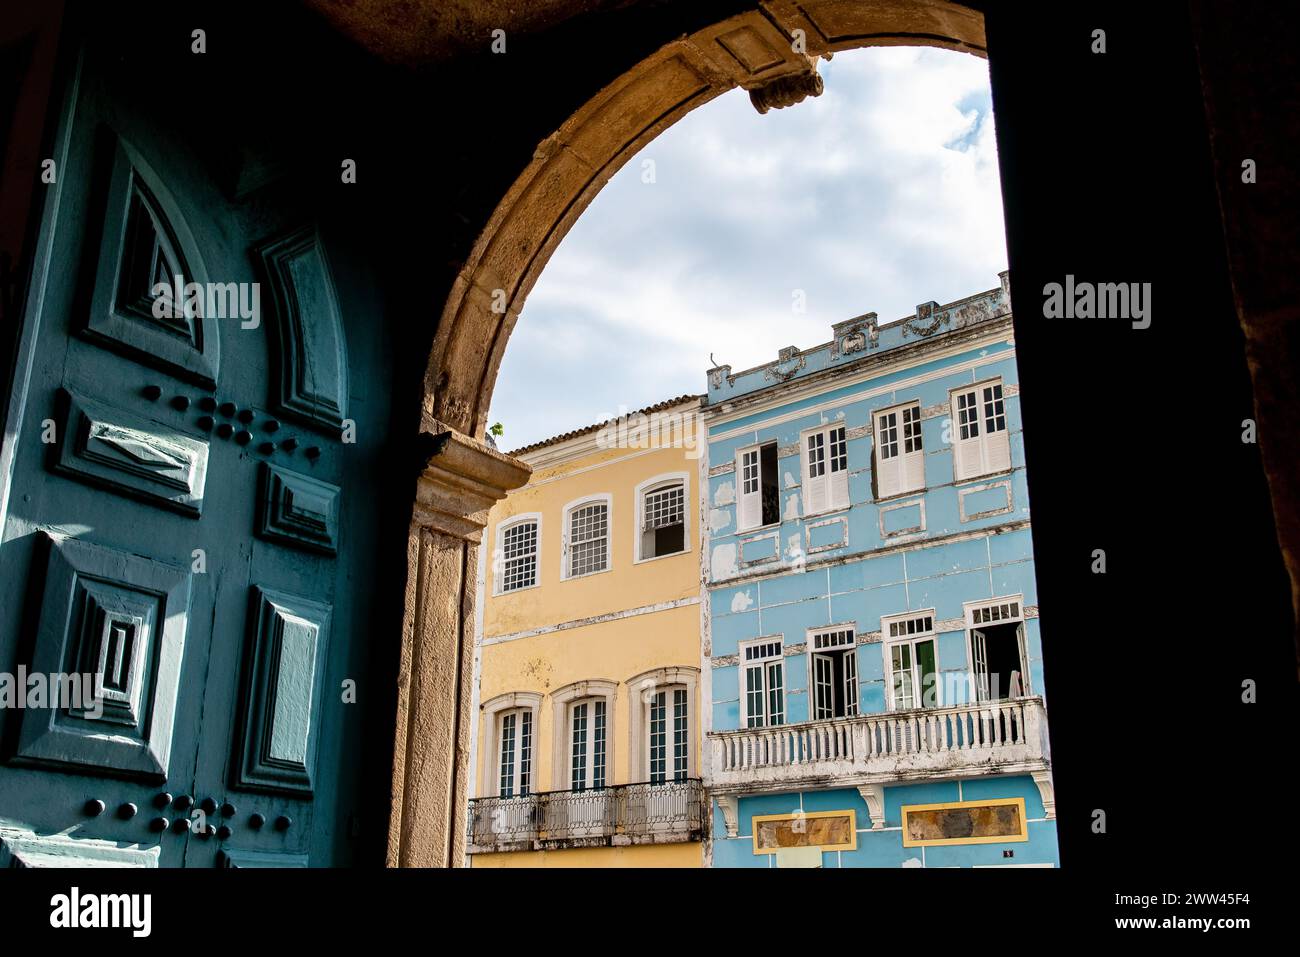 Salvador, Bahia, Brazil - April 19, 2019: View of houses in Pelourinho from inside the Carmo church during Easter Week mass in the city of Salvador, B Stock Photo